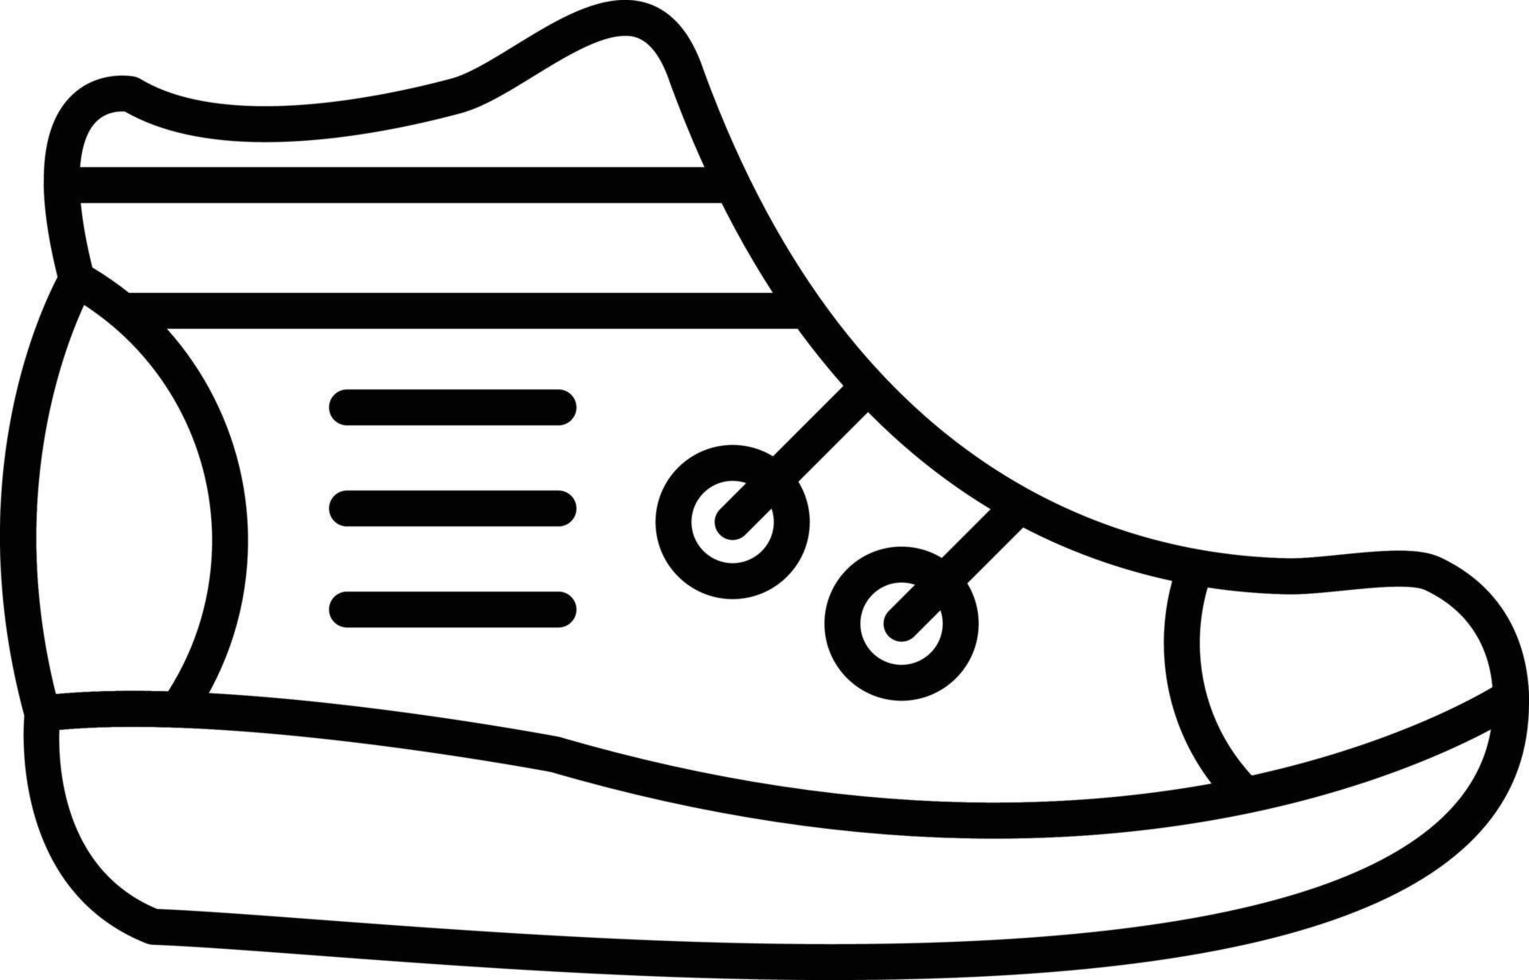 Sneakers Outline Icon vector